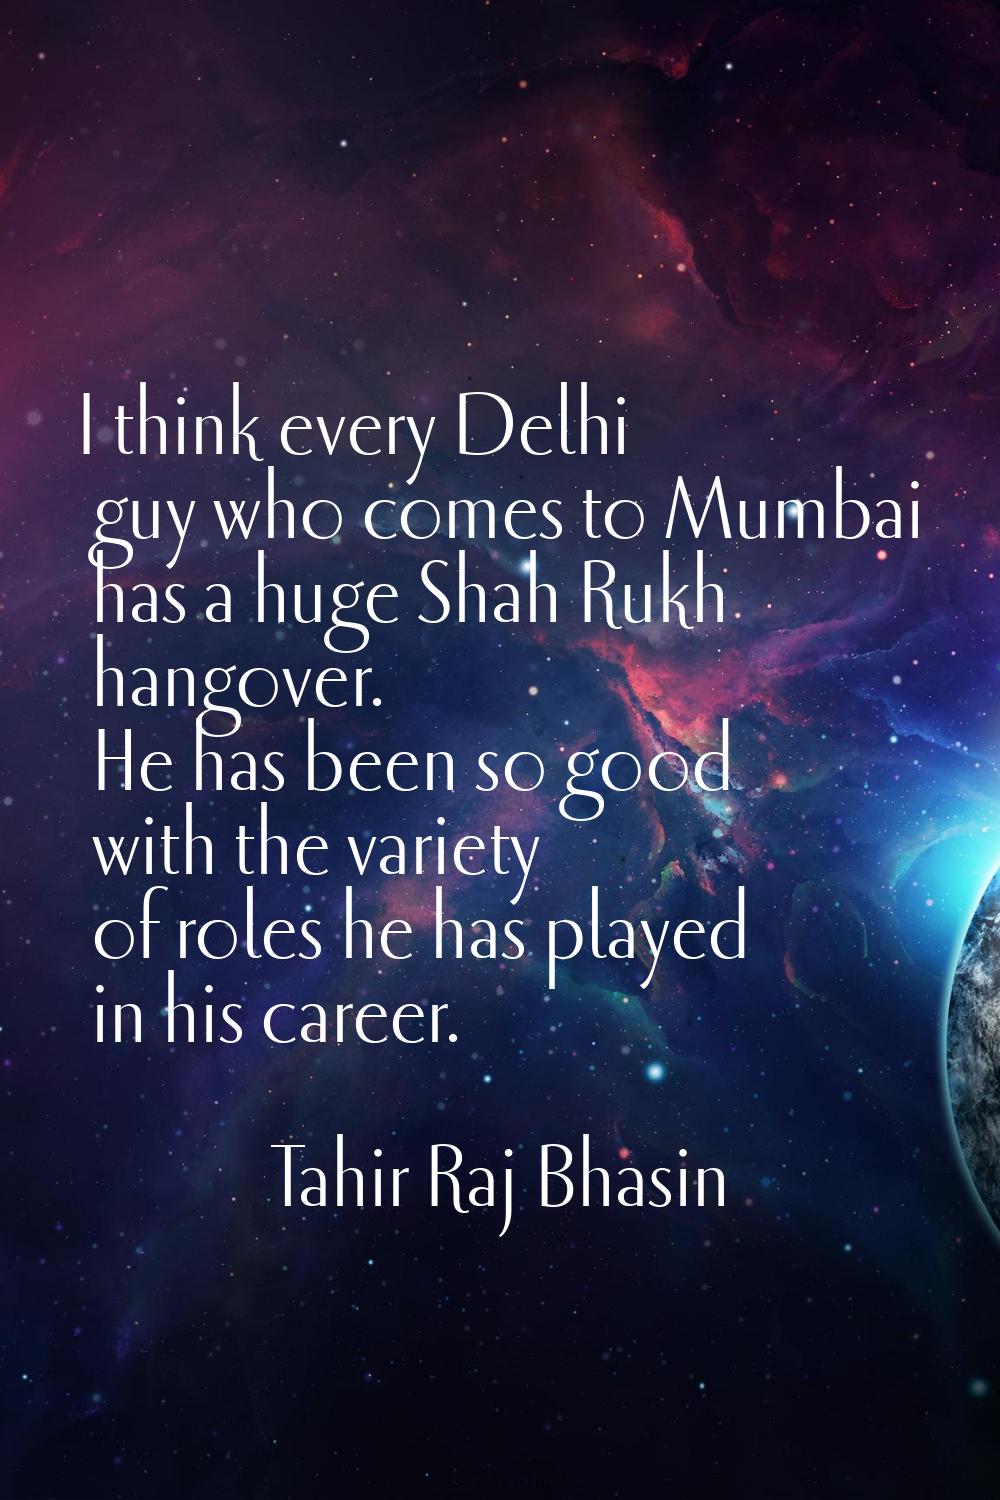 I think every Delhi guy who comes to Mumbai has a huge Shah Rukh hangover. He has been so good with